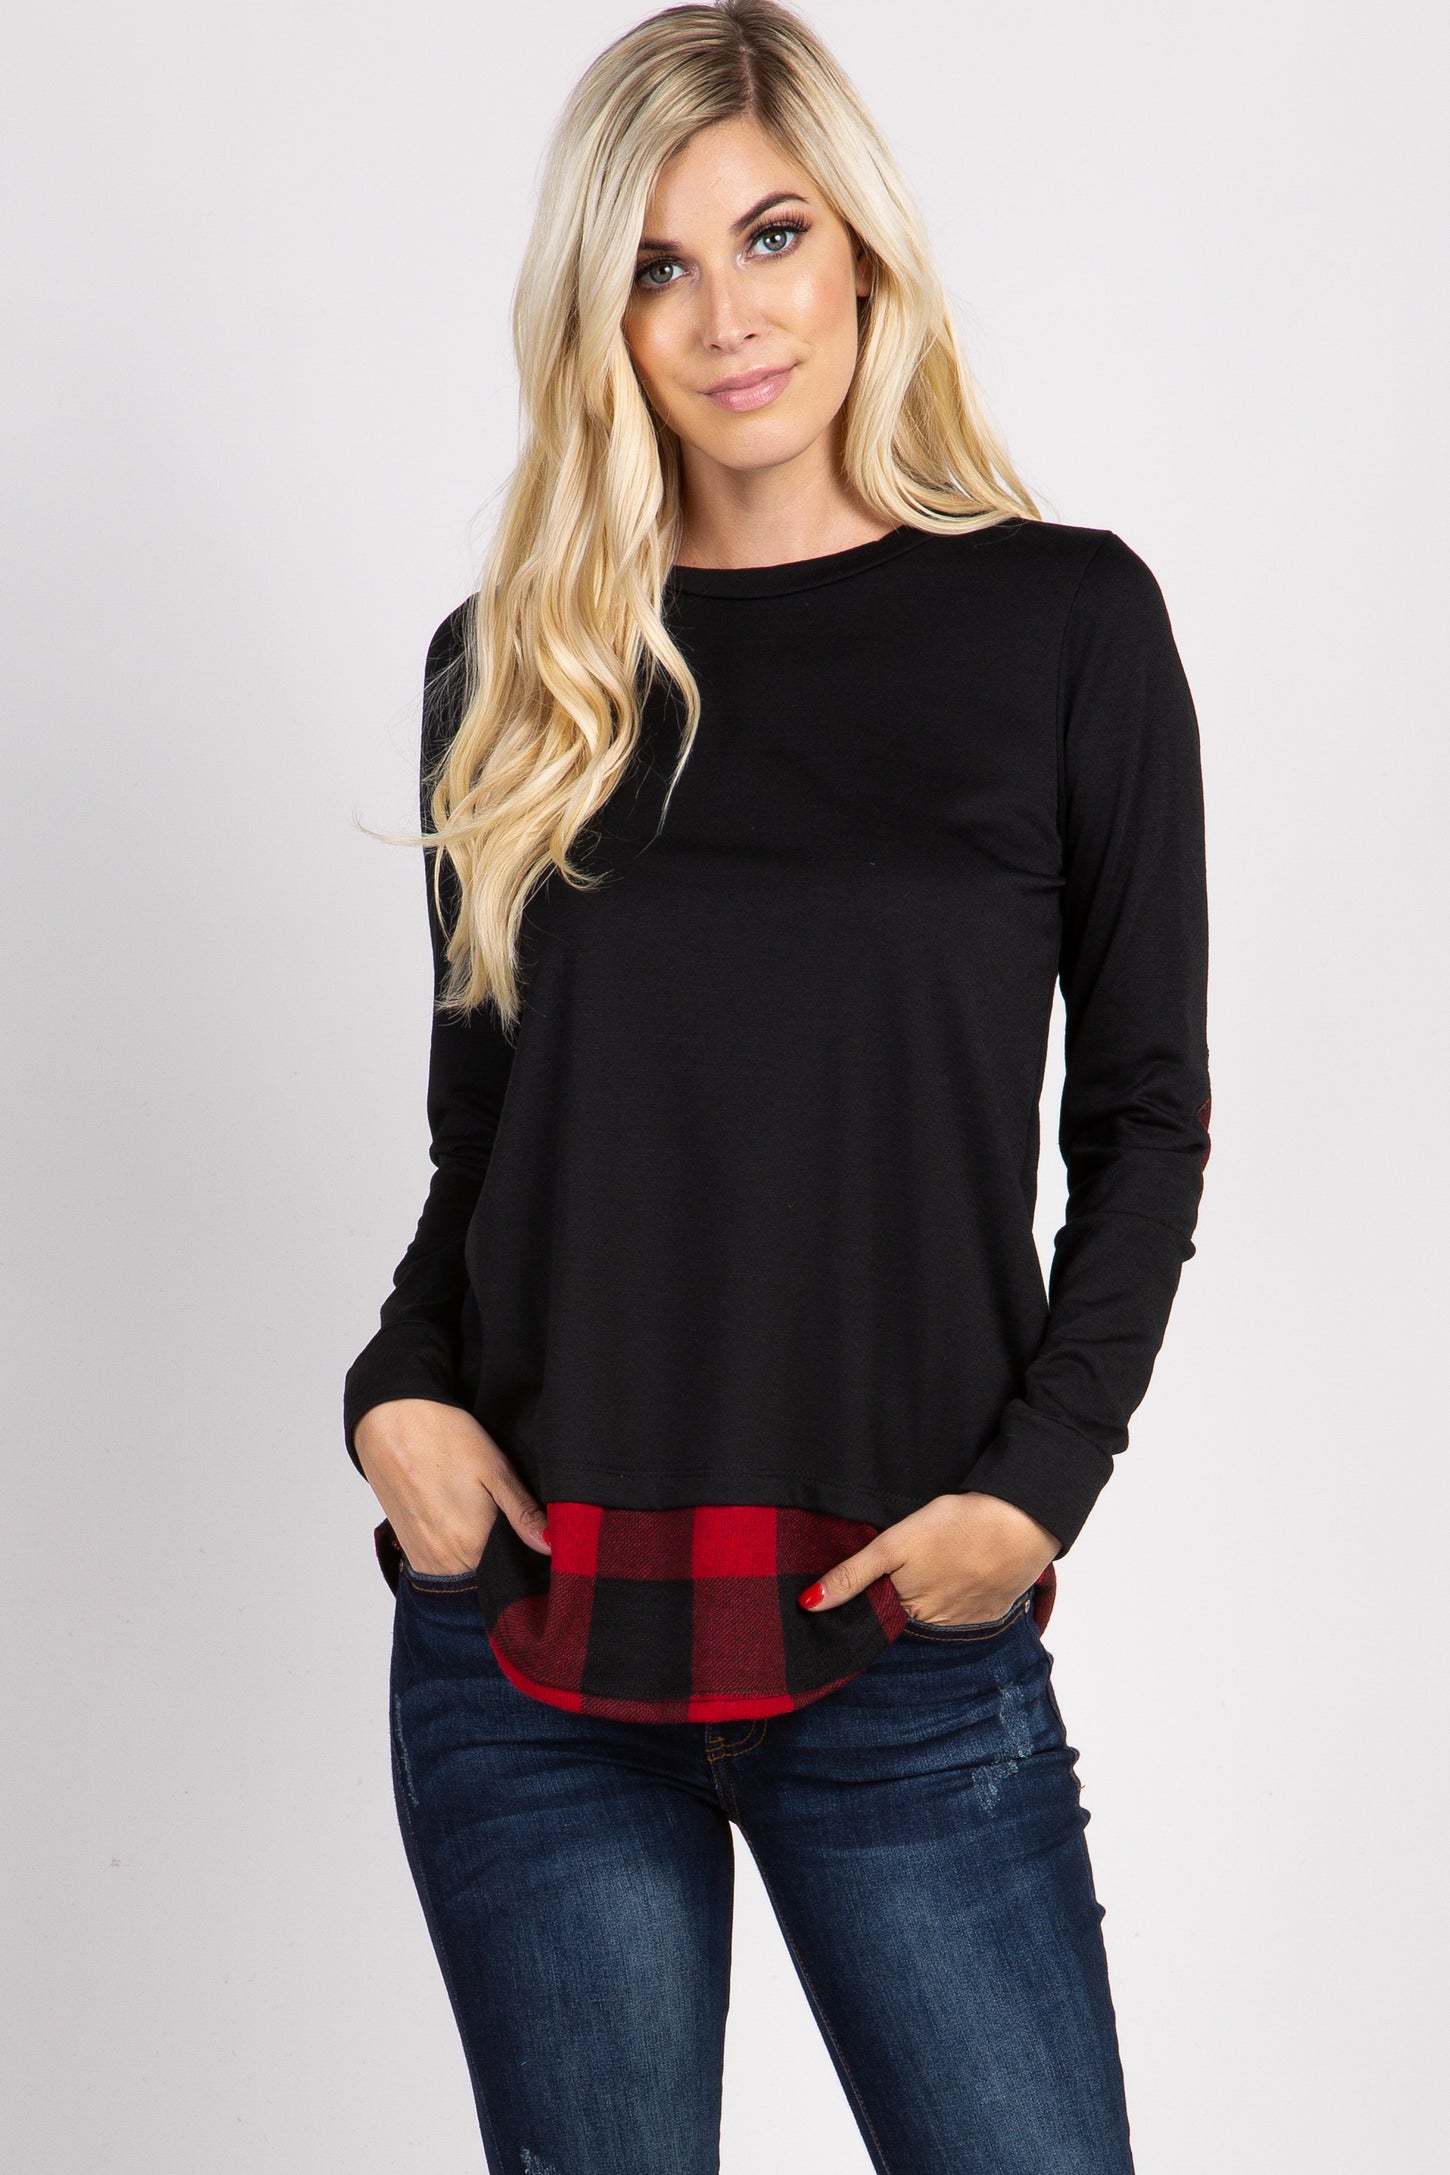 PinkBlush Black Solid Plaid Accent Long Sleeve Top